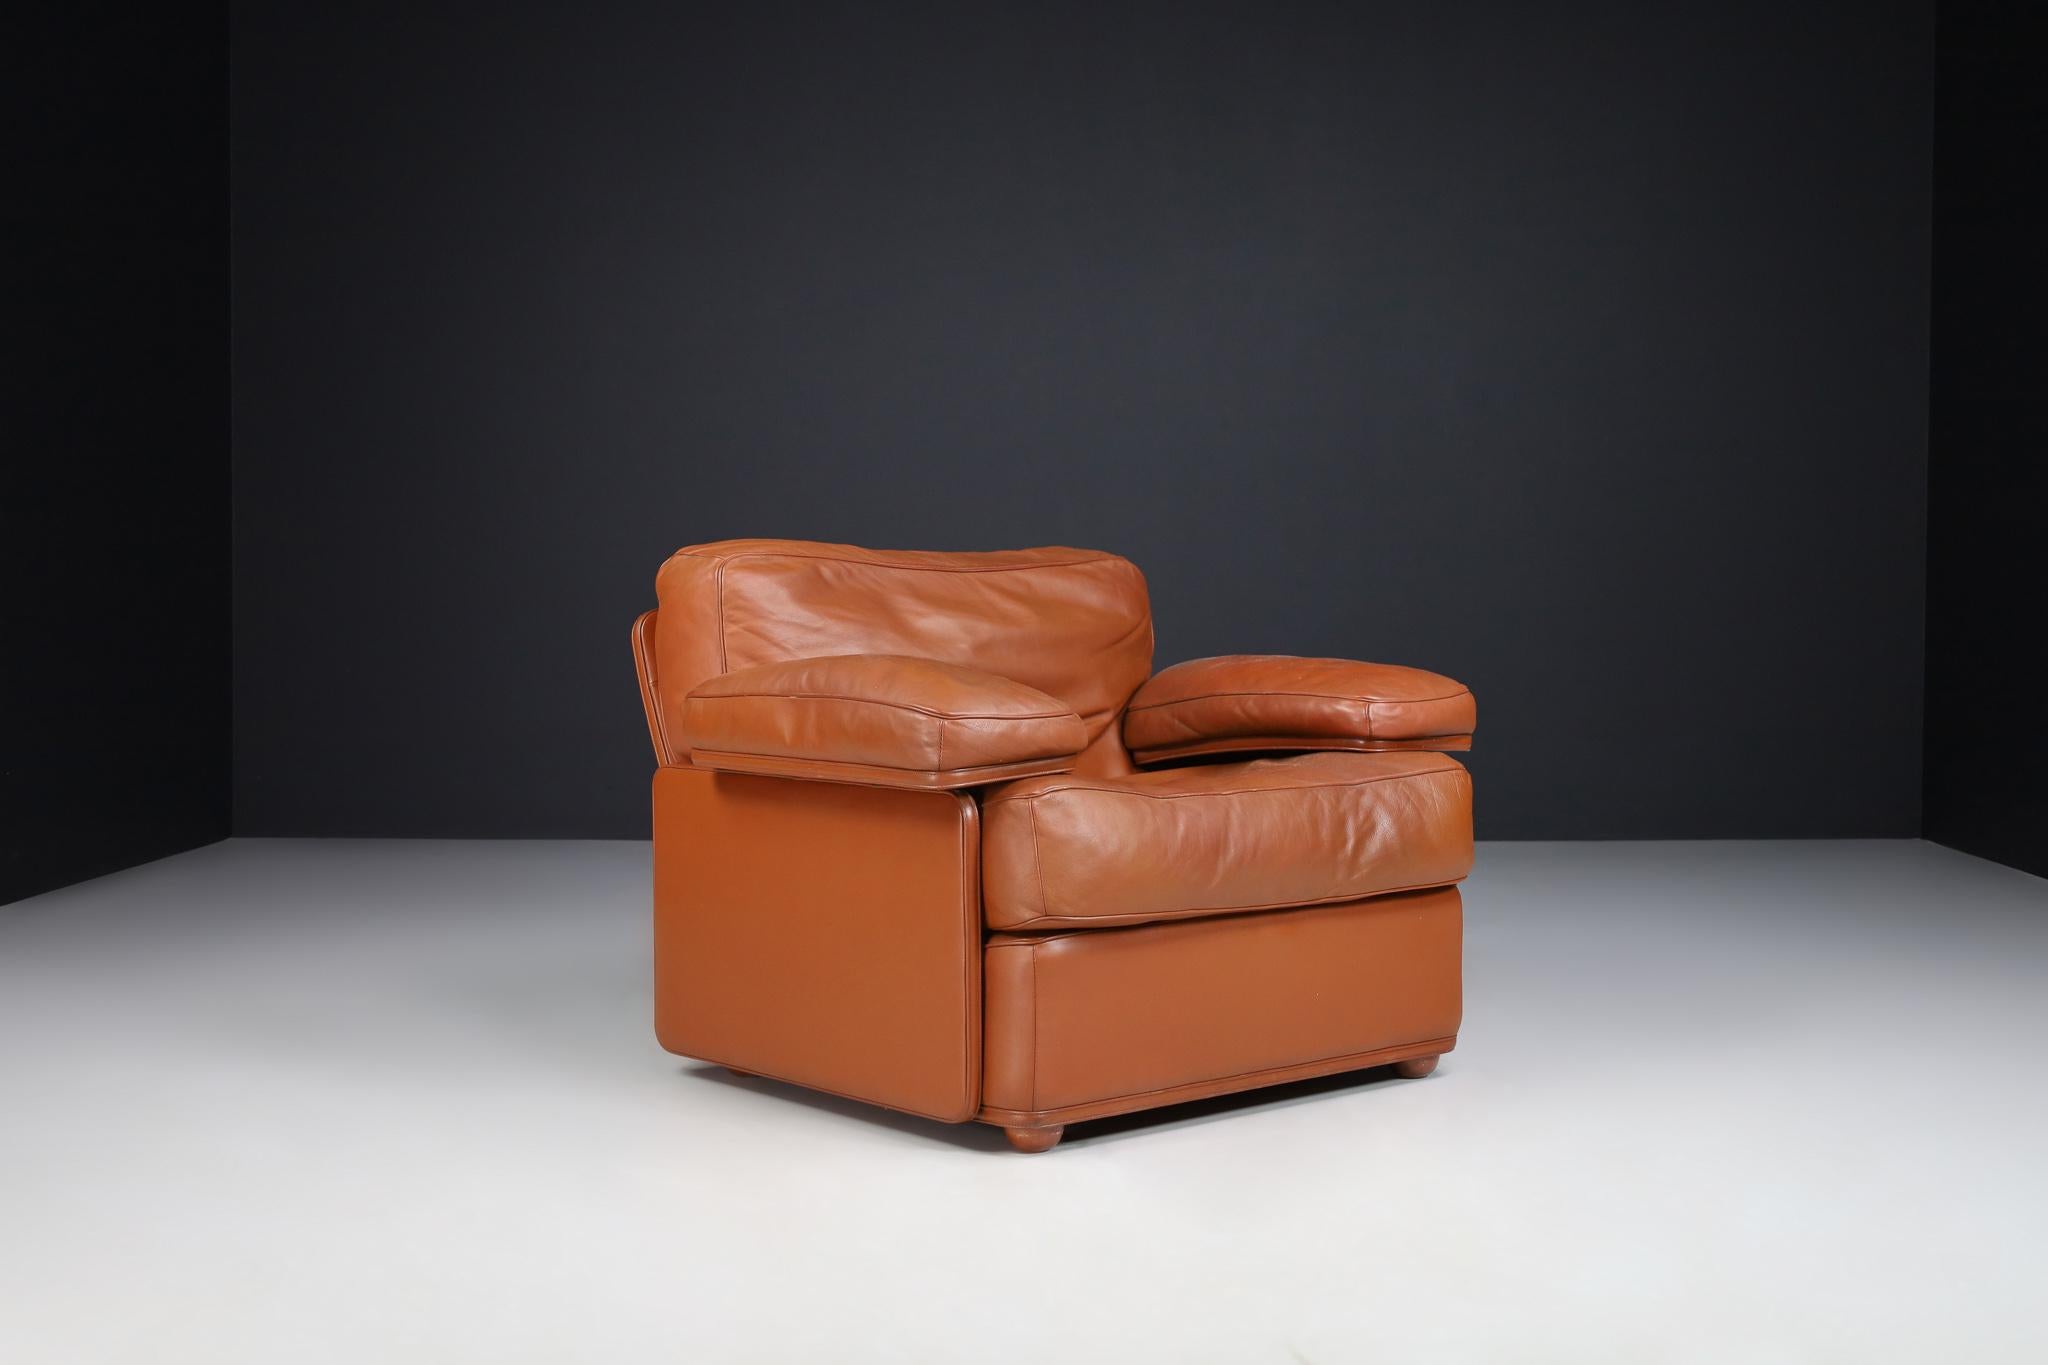 Tito Agnoli For Poltrona Frau Leather Lounge Chairs by, Italy 1970s For Sale 1